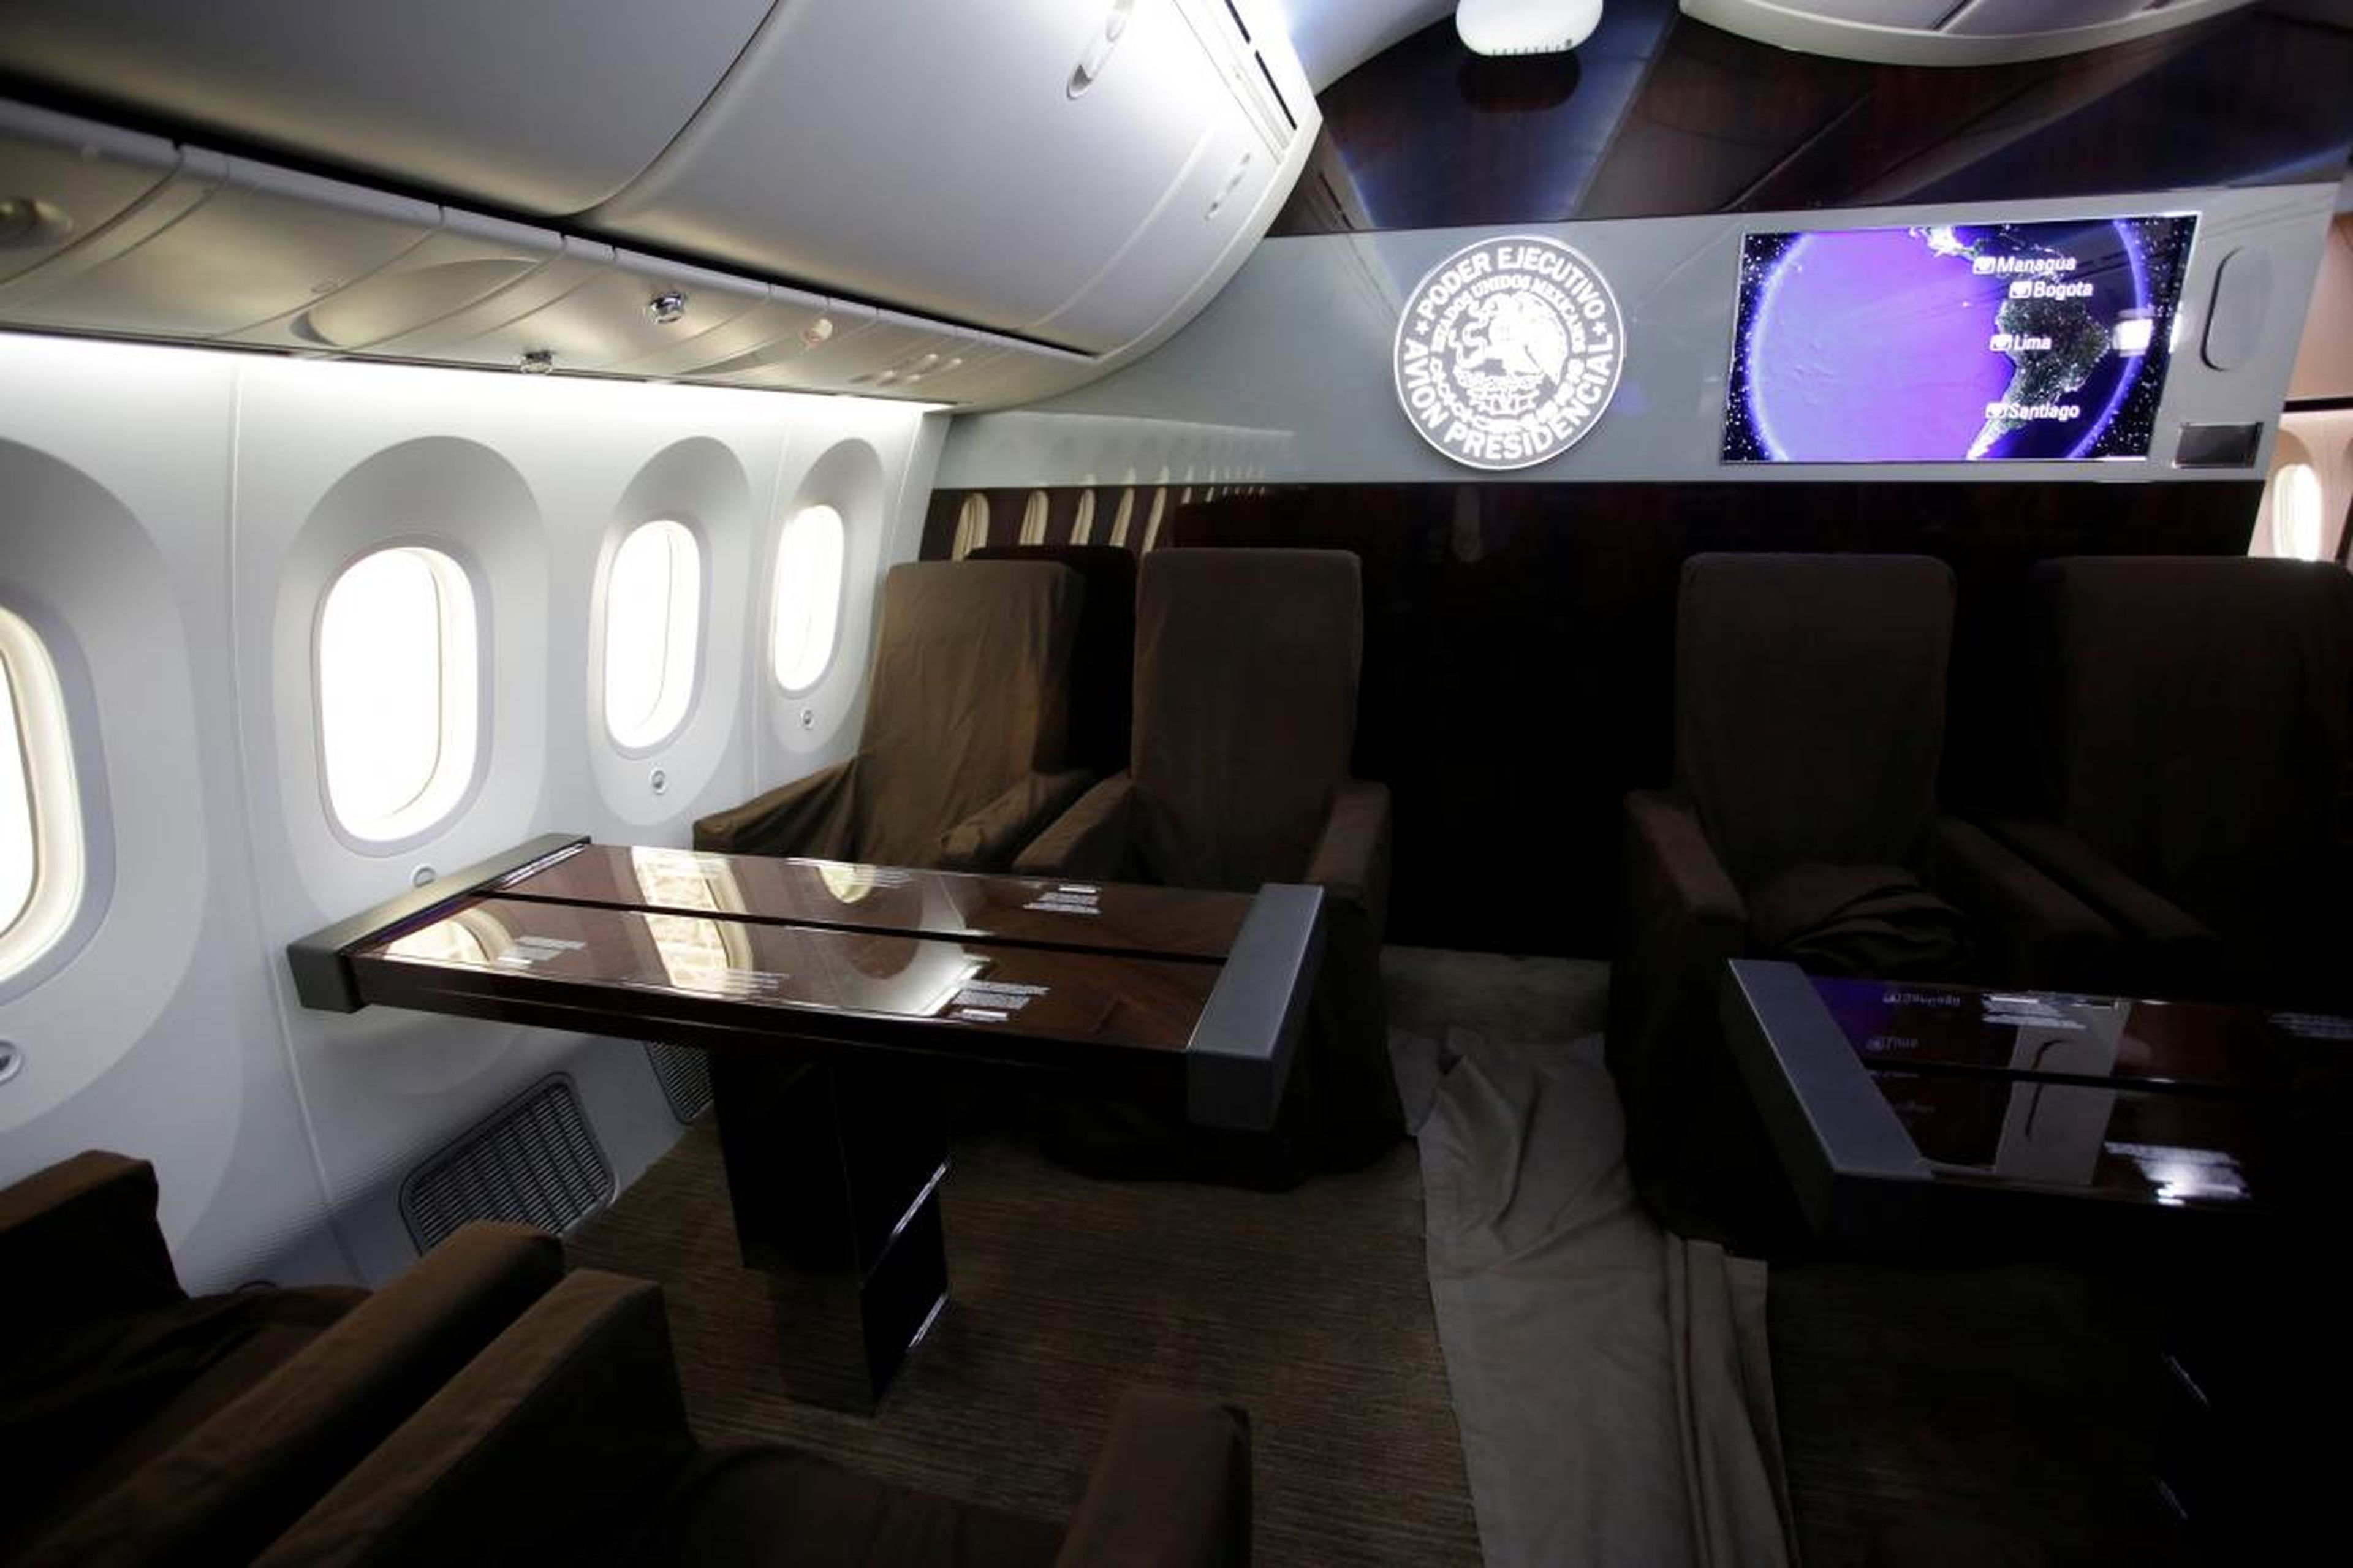 You won't find traditional airline seats here. Instead, the interior has been designed for work and relaxation.